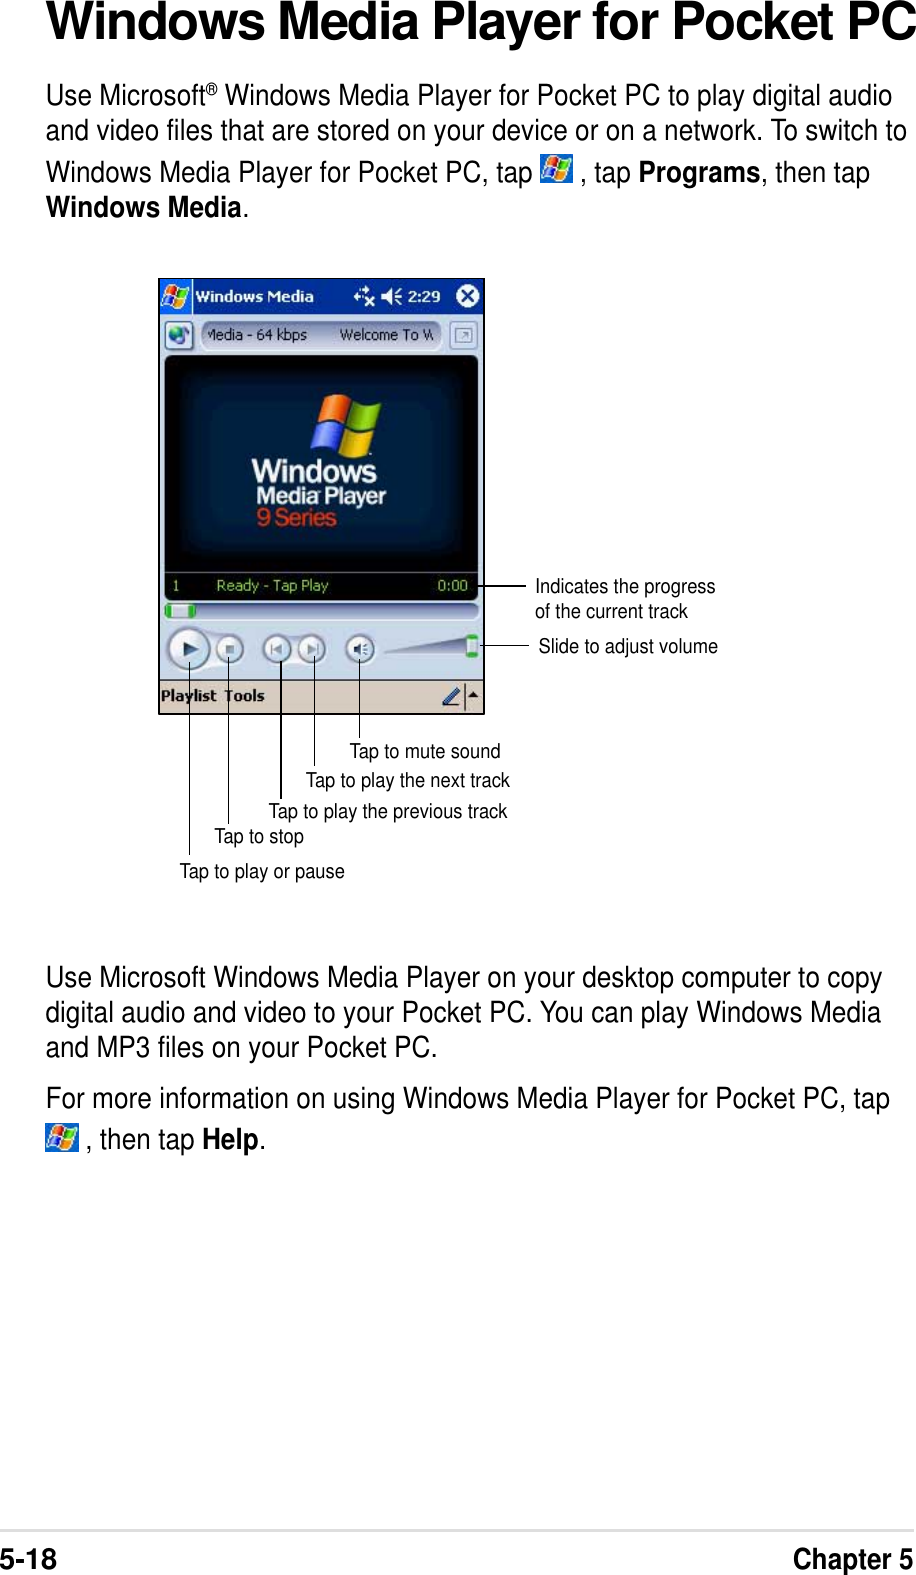 5-18Chapter 5Windows Media Player for Pocket PCUse Microsoft® Windows Media Player for Pocket PC to play digital audioand video files that are stored on your device or on a network. To switch toWindows Media Player for Pocket PC, tap   , tap Programs, then tapWindows Media.Use Microsoft Windows Media Player on your desktop computer to copydigital audio and video to your Pocket PC. You can play Windows Mediaand MP3 files on your Pocket PC.For more information on using Windows Media Player for Pocket PC, tap , then tap Help.Indicates the progressof the current trackTap to play or pauseTap to stopTap to play the previous trackTap to play the next trackSlide to adjust volumeTap to mute sound